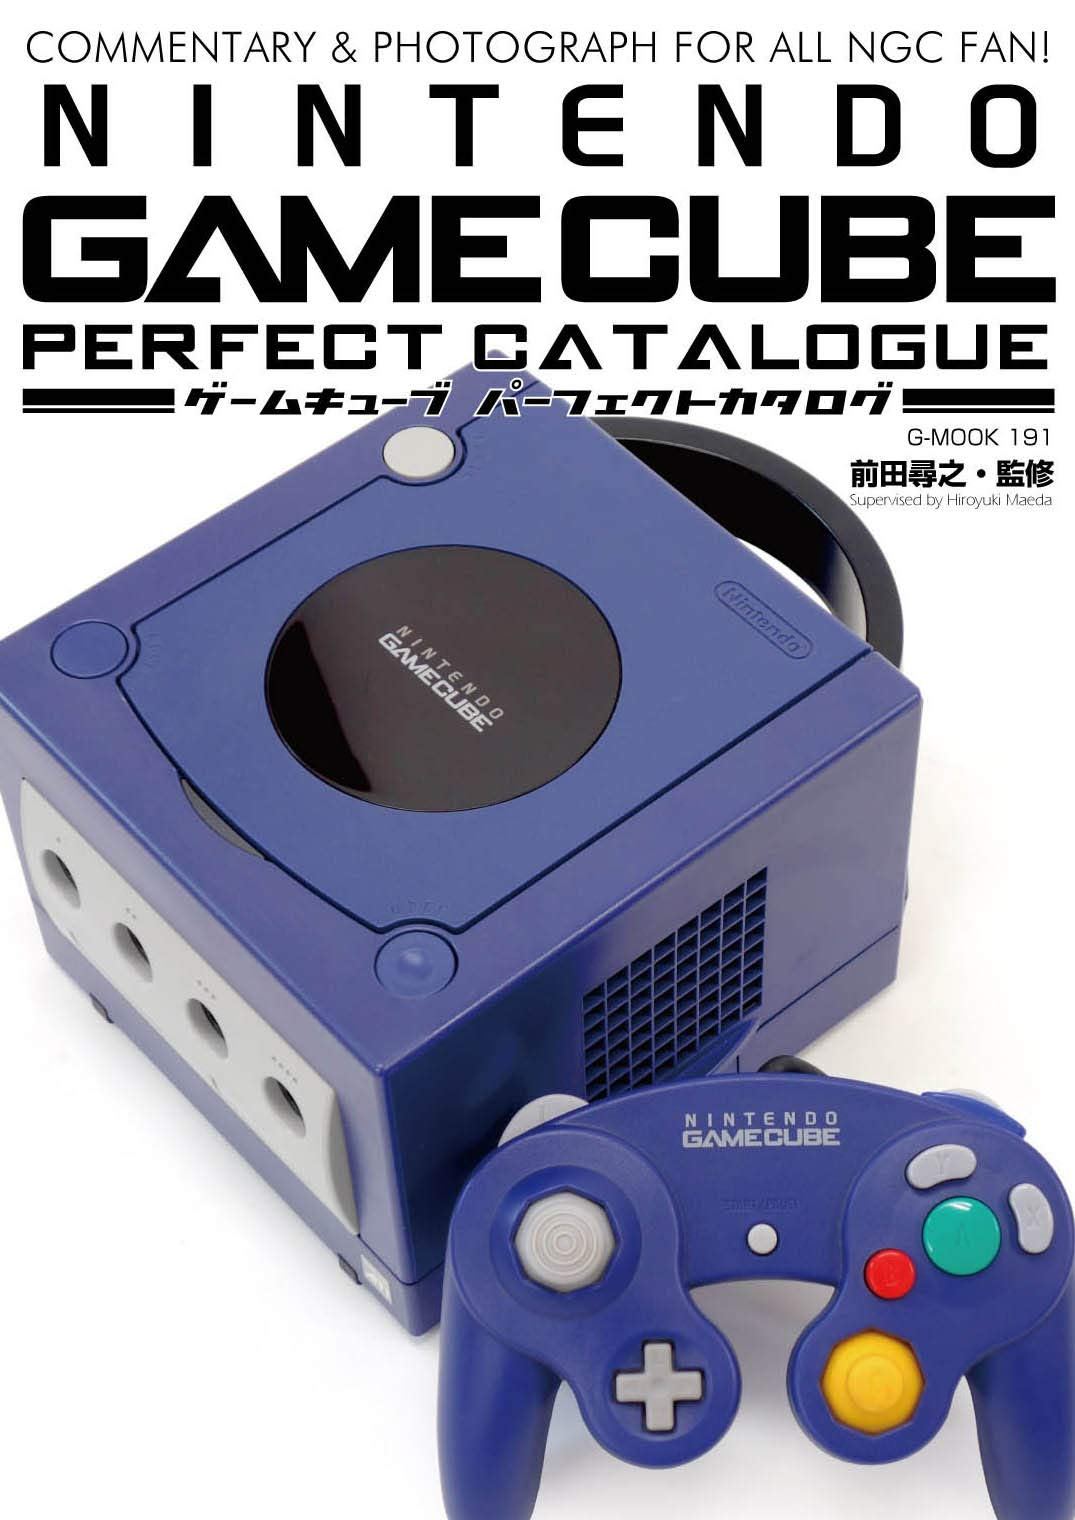 video game cube